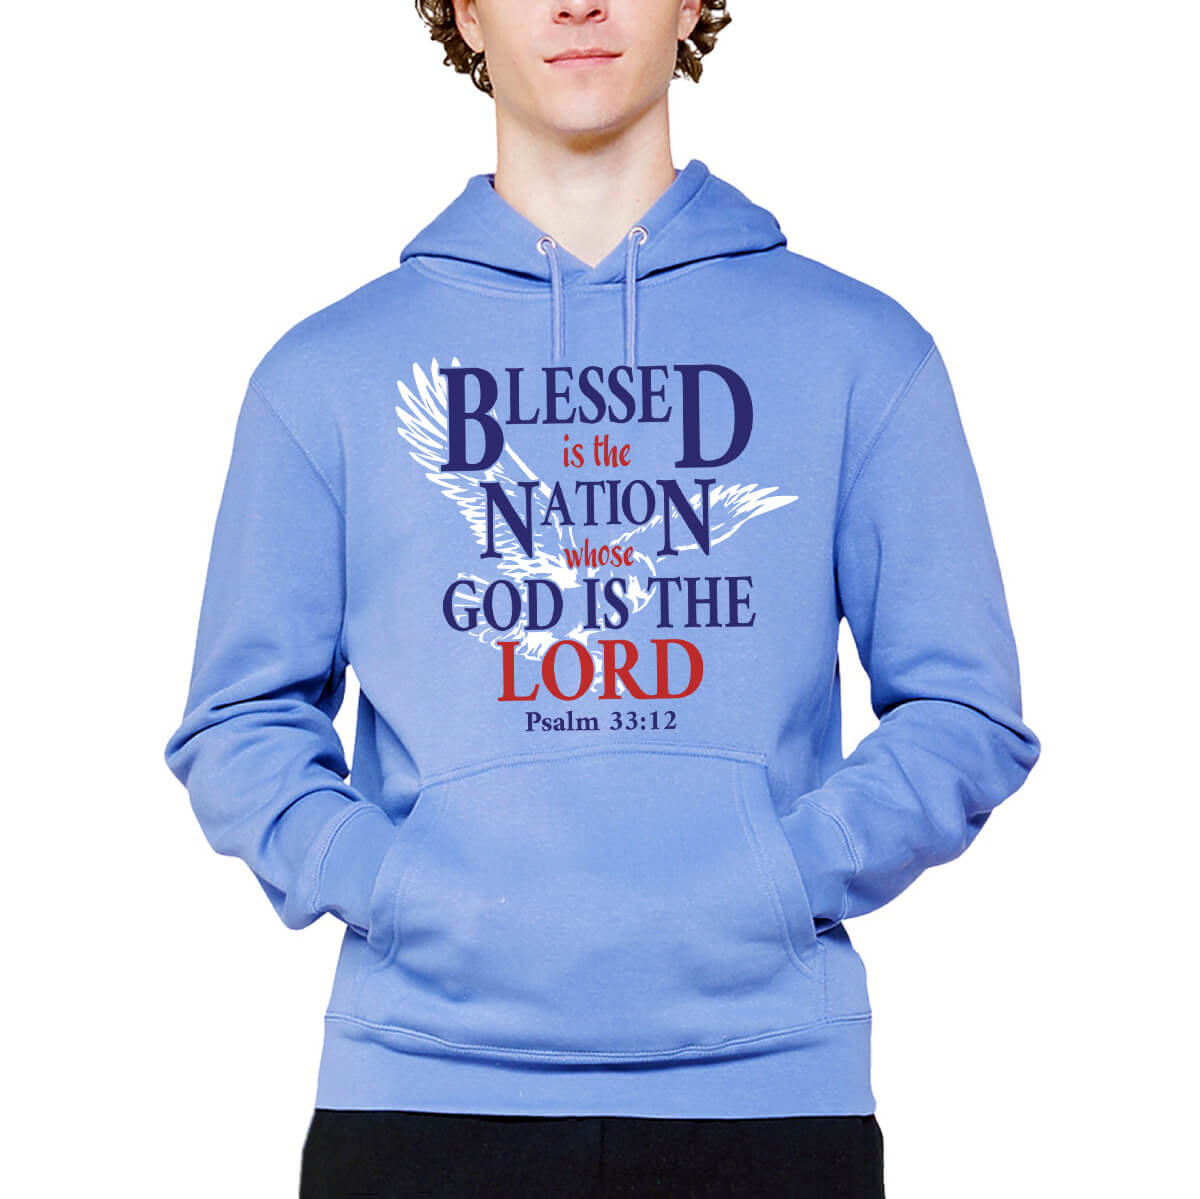 Blessed Is The Nation Whose God Is The Lord Men's Sweatshirt Hoodie